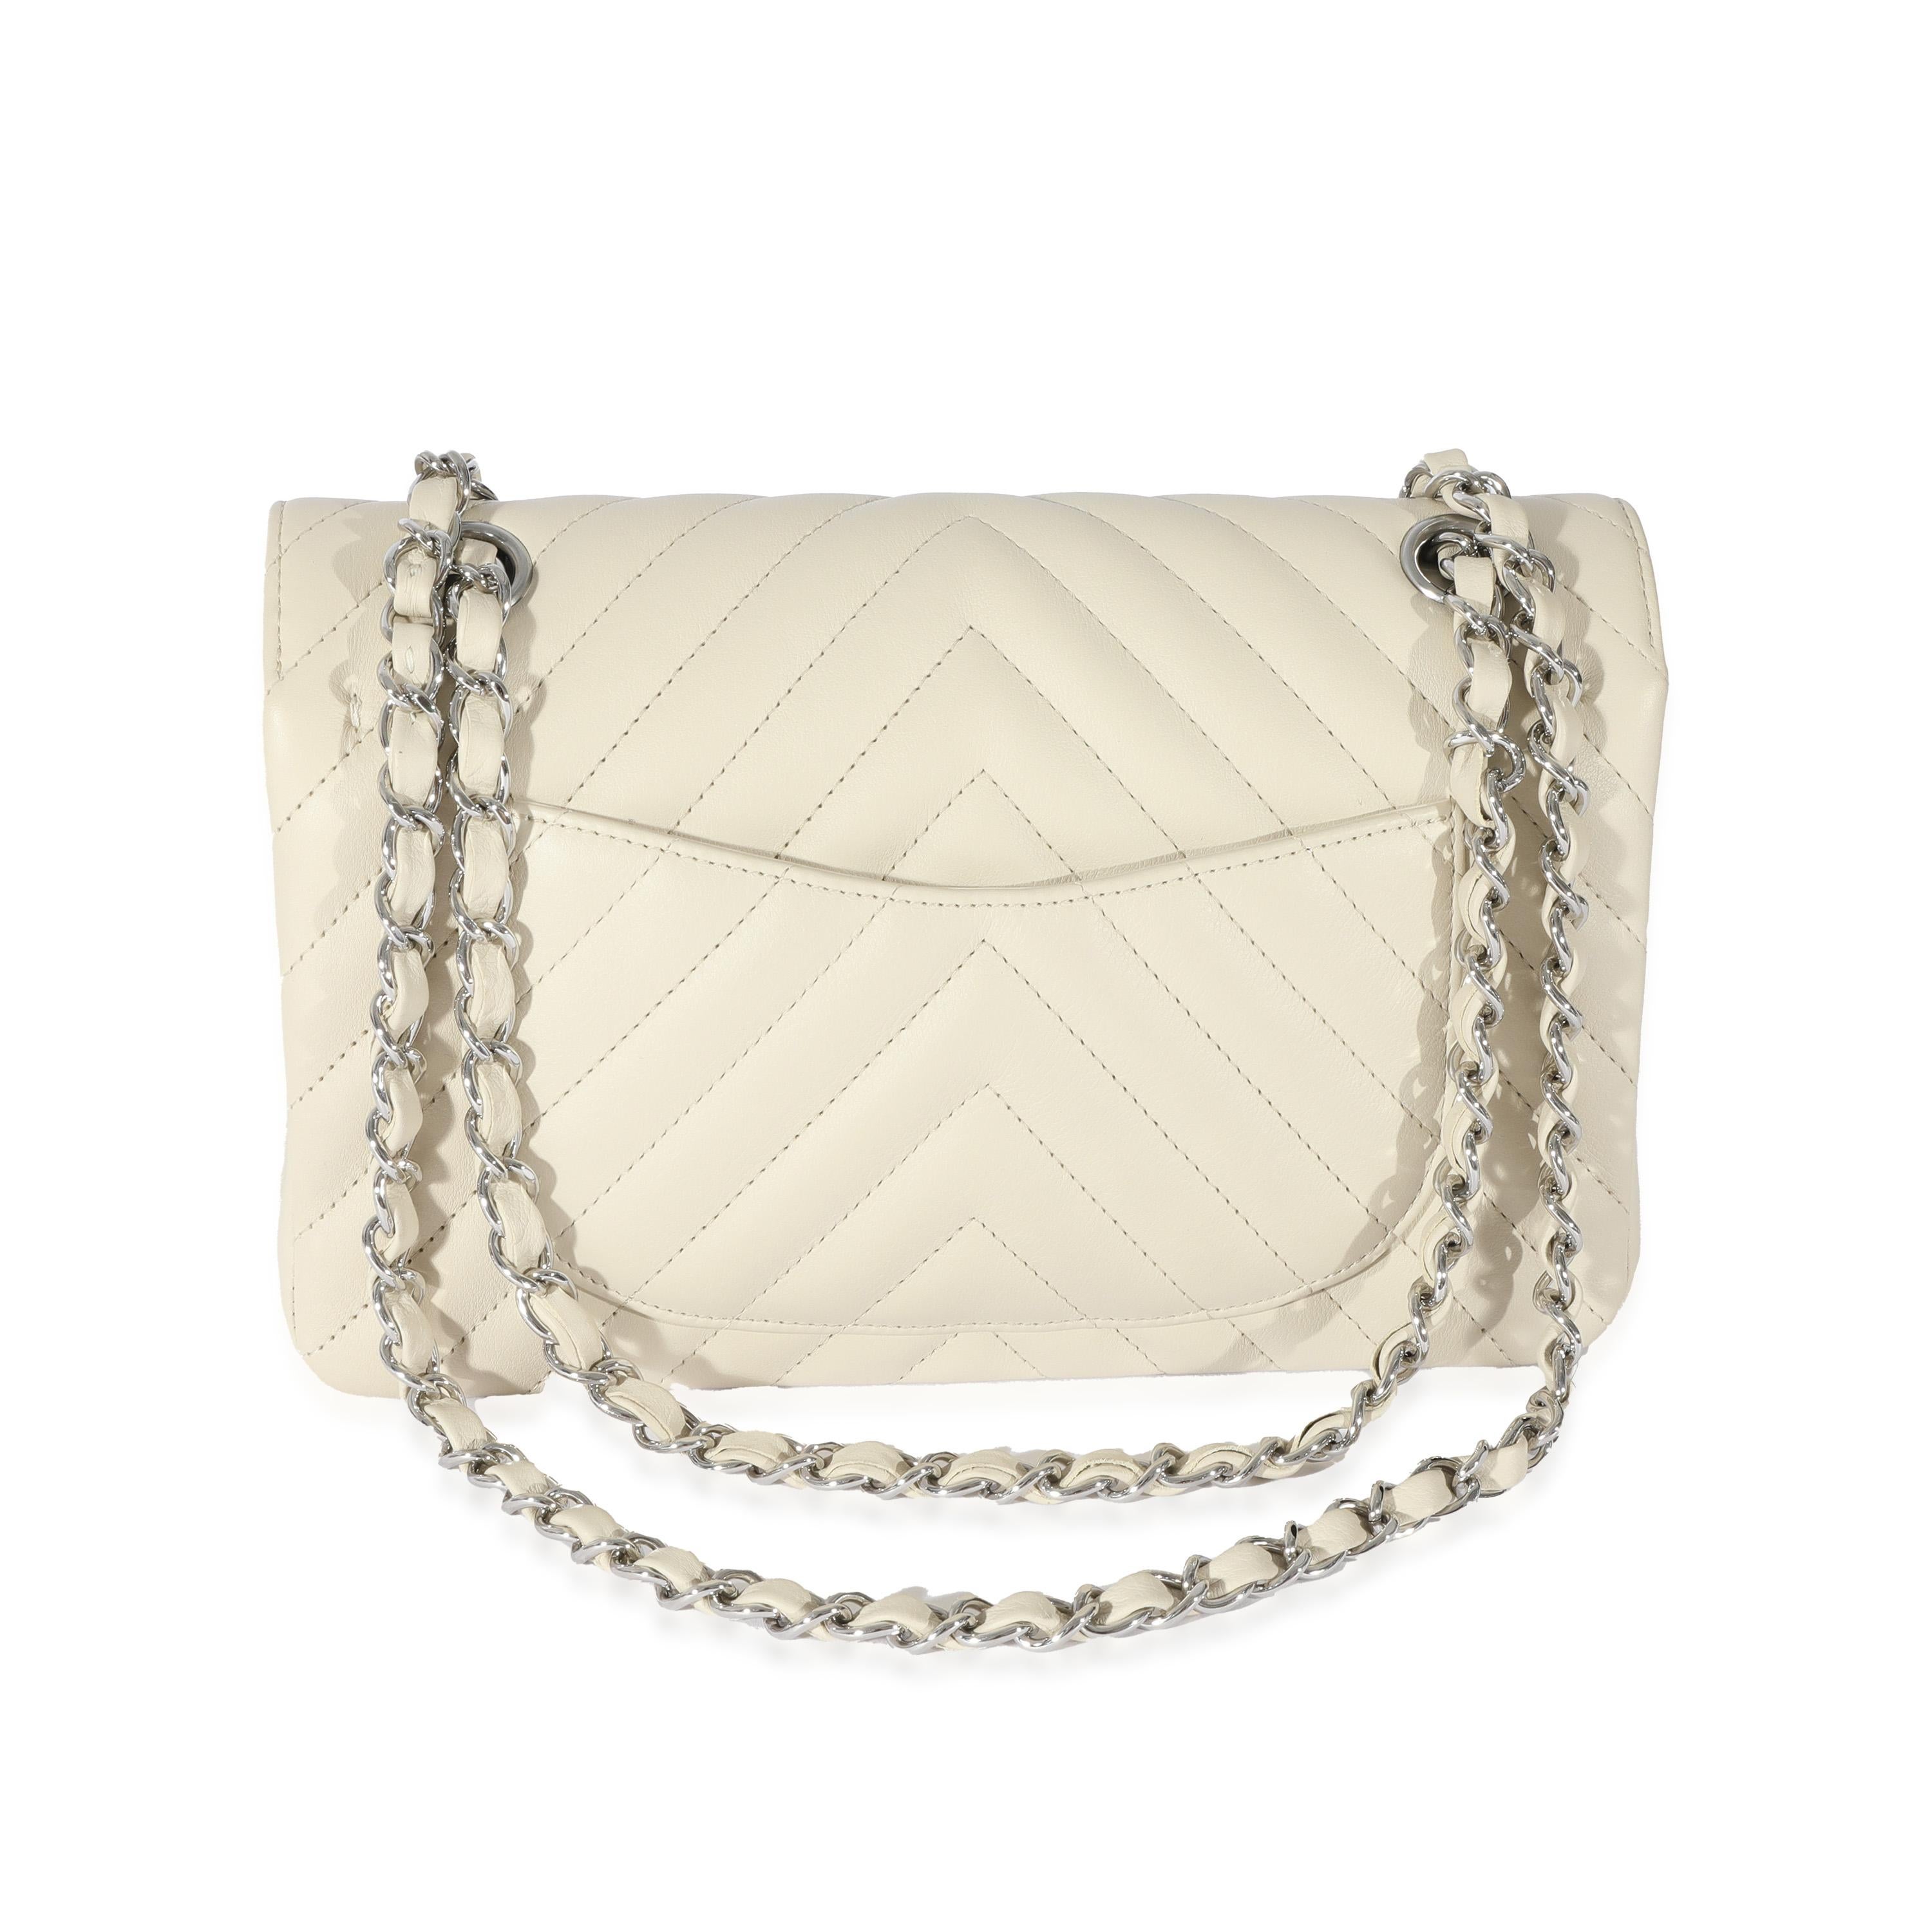 Chanel Neutral Chevron Quilted Leather Small Classic Flap In Excellent Condition For Sale In New York, NY